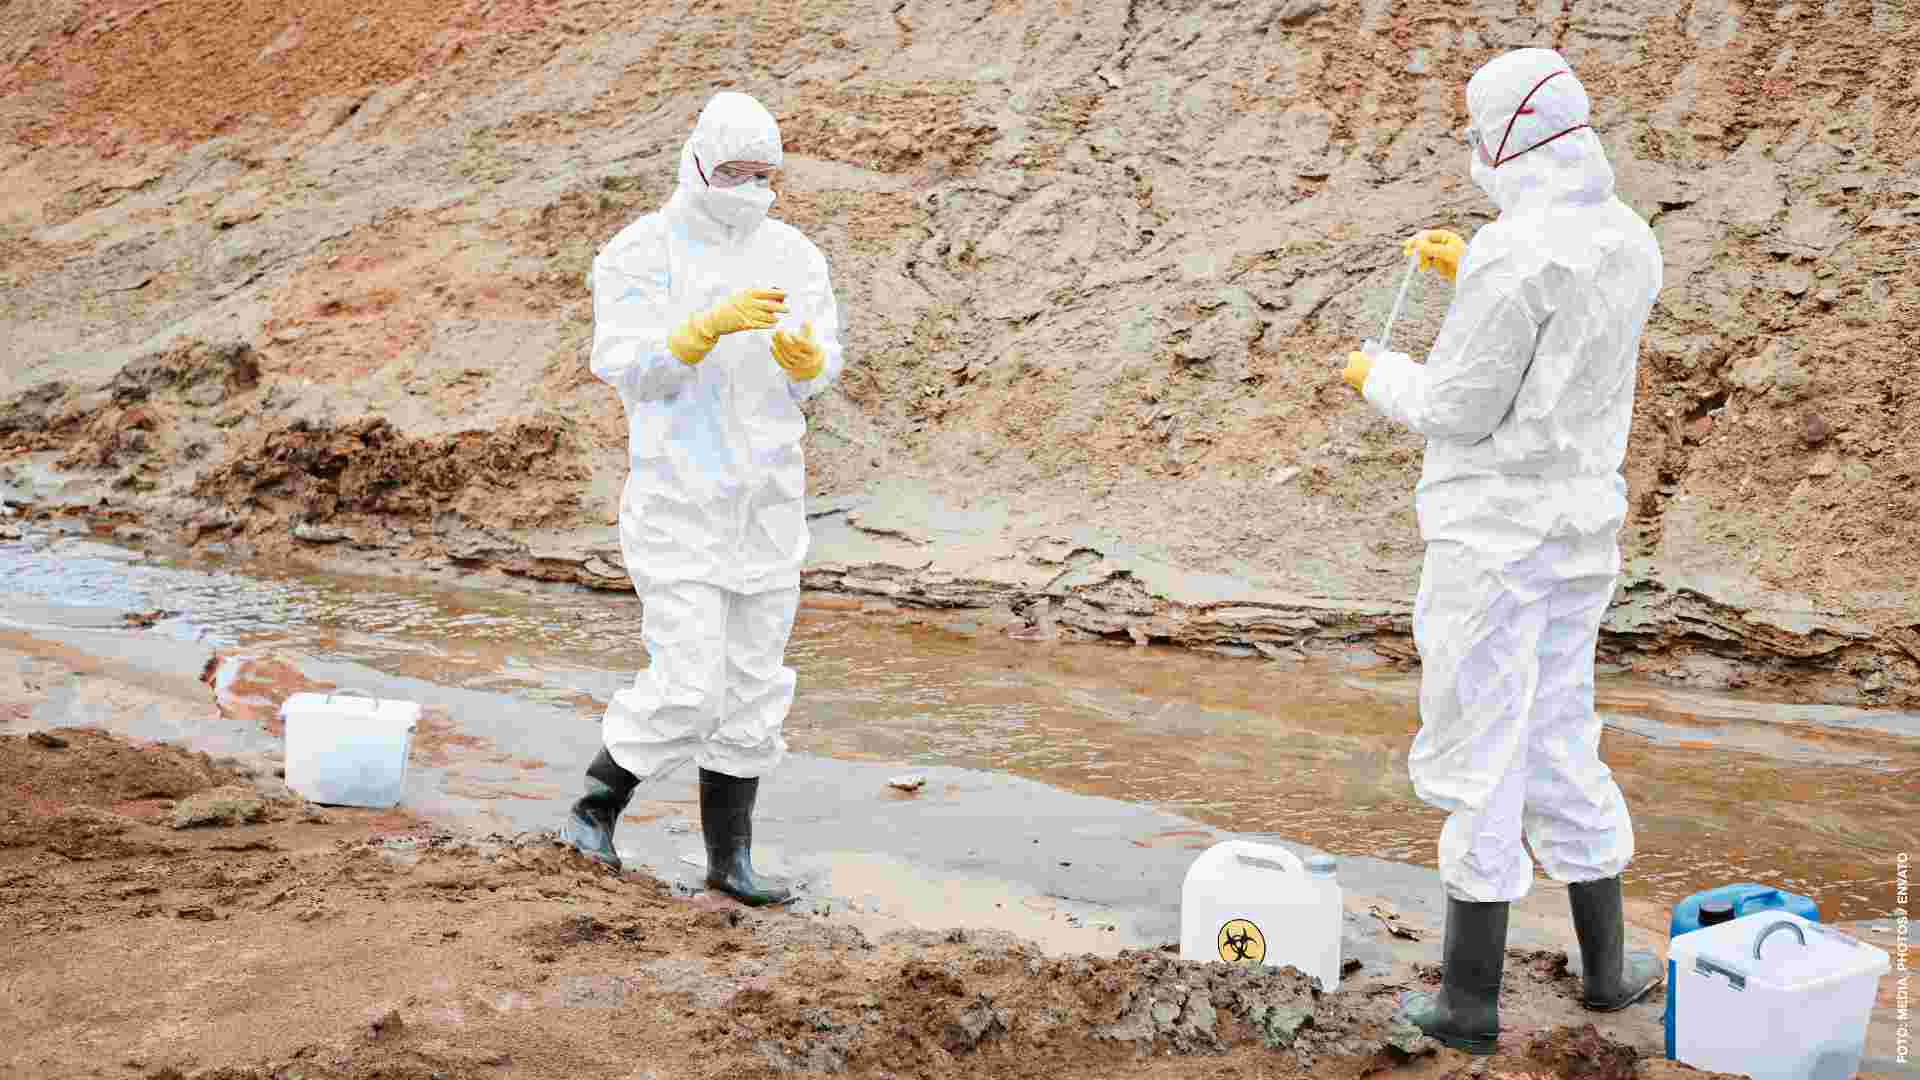 Environmental scientists in masks, gloves and protective suits working with toxic substances on polluted area